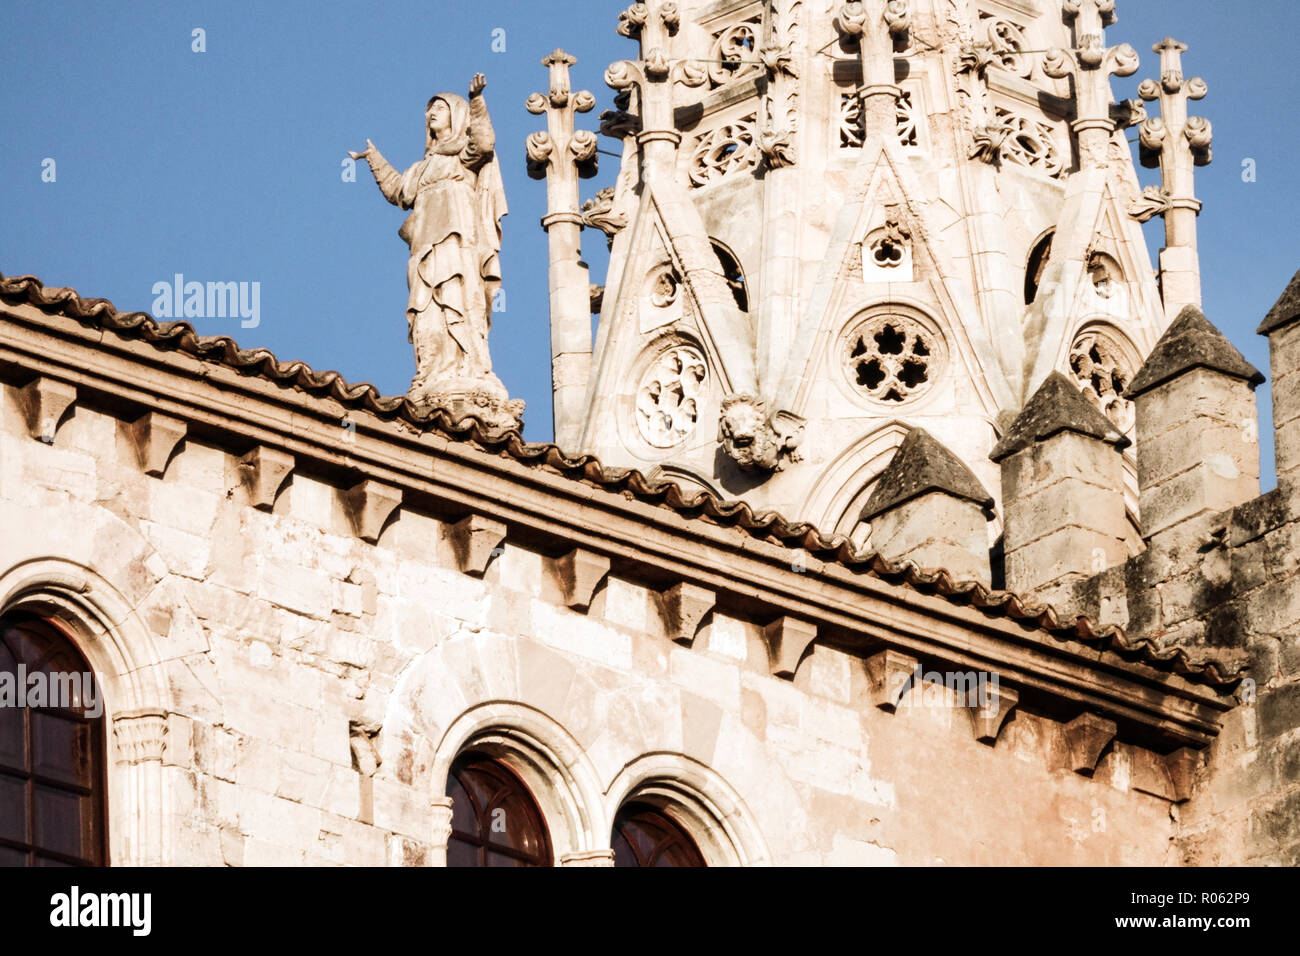 La Seu Cathedral Palma Mallorca Cathedral, detail of the statue of Saint Mary, Spain Cathedrals Stock Photo